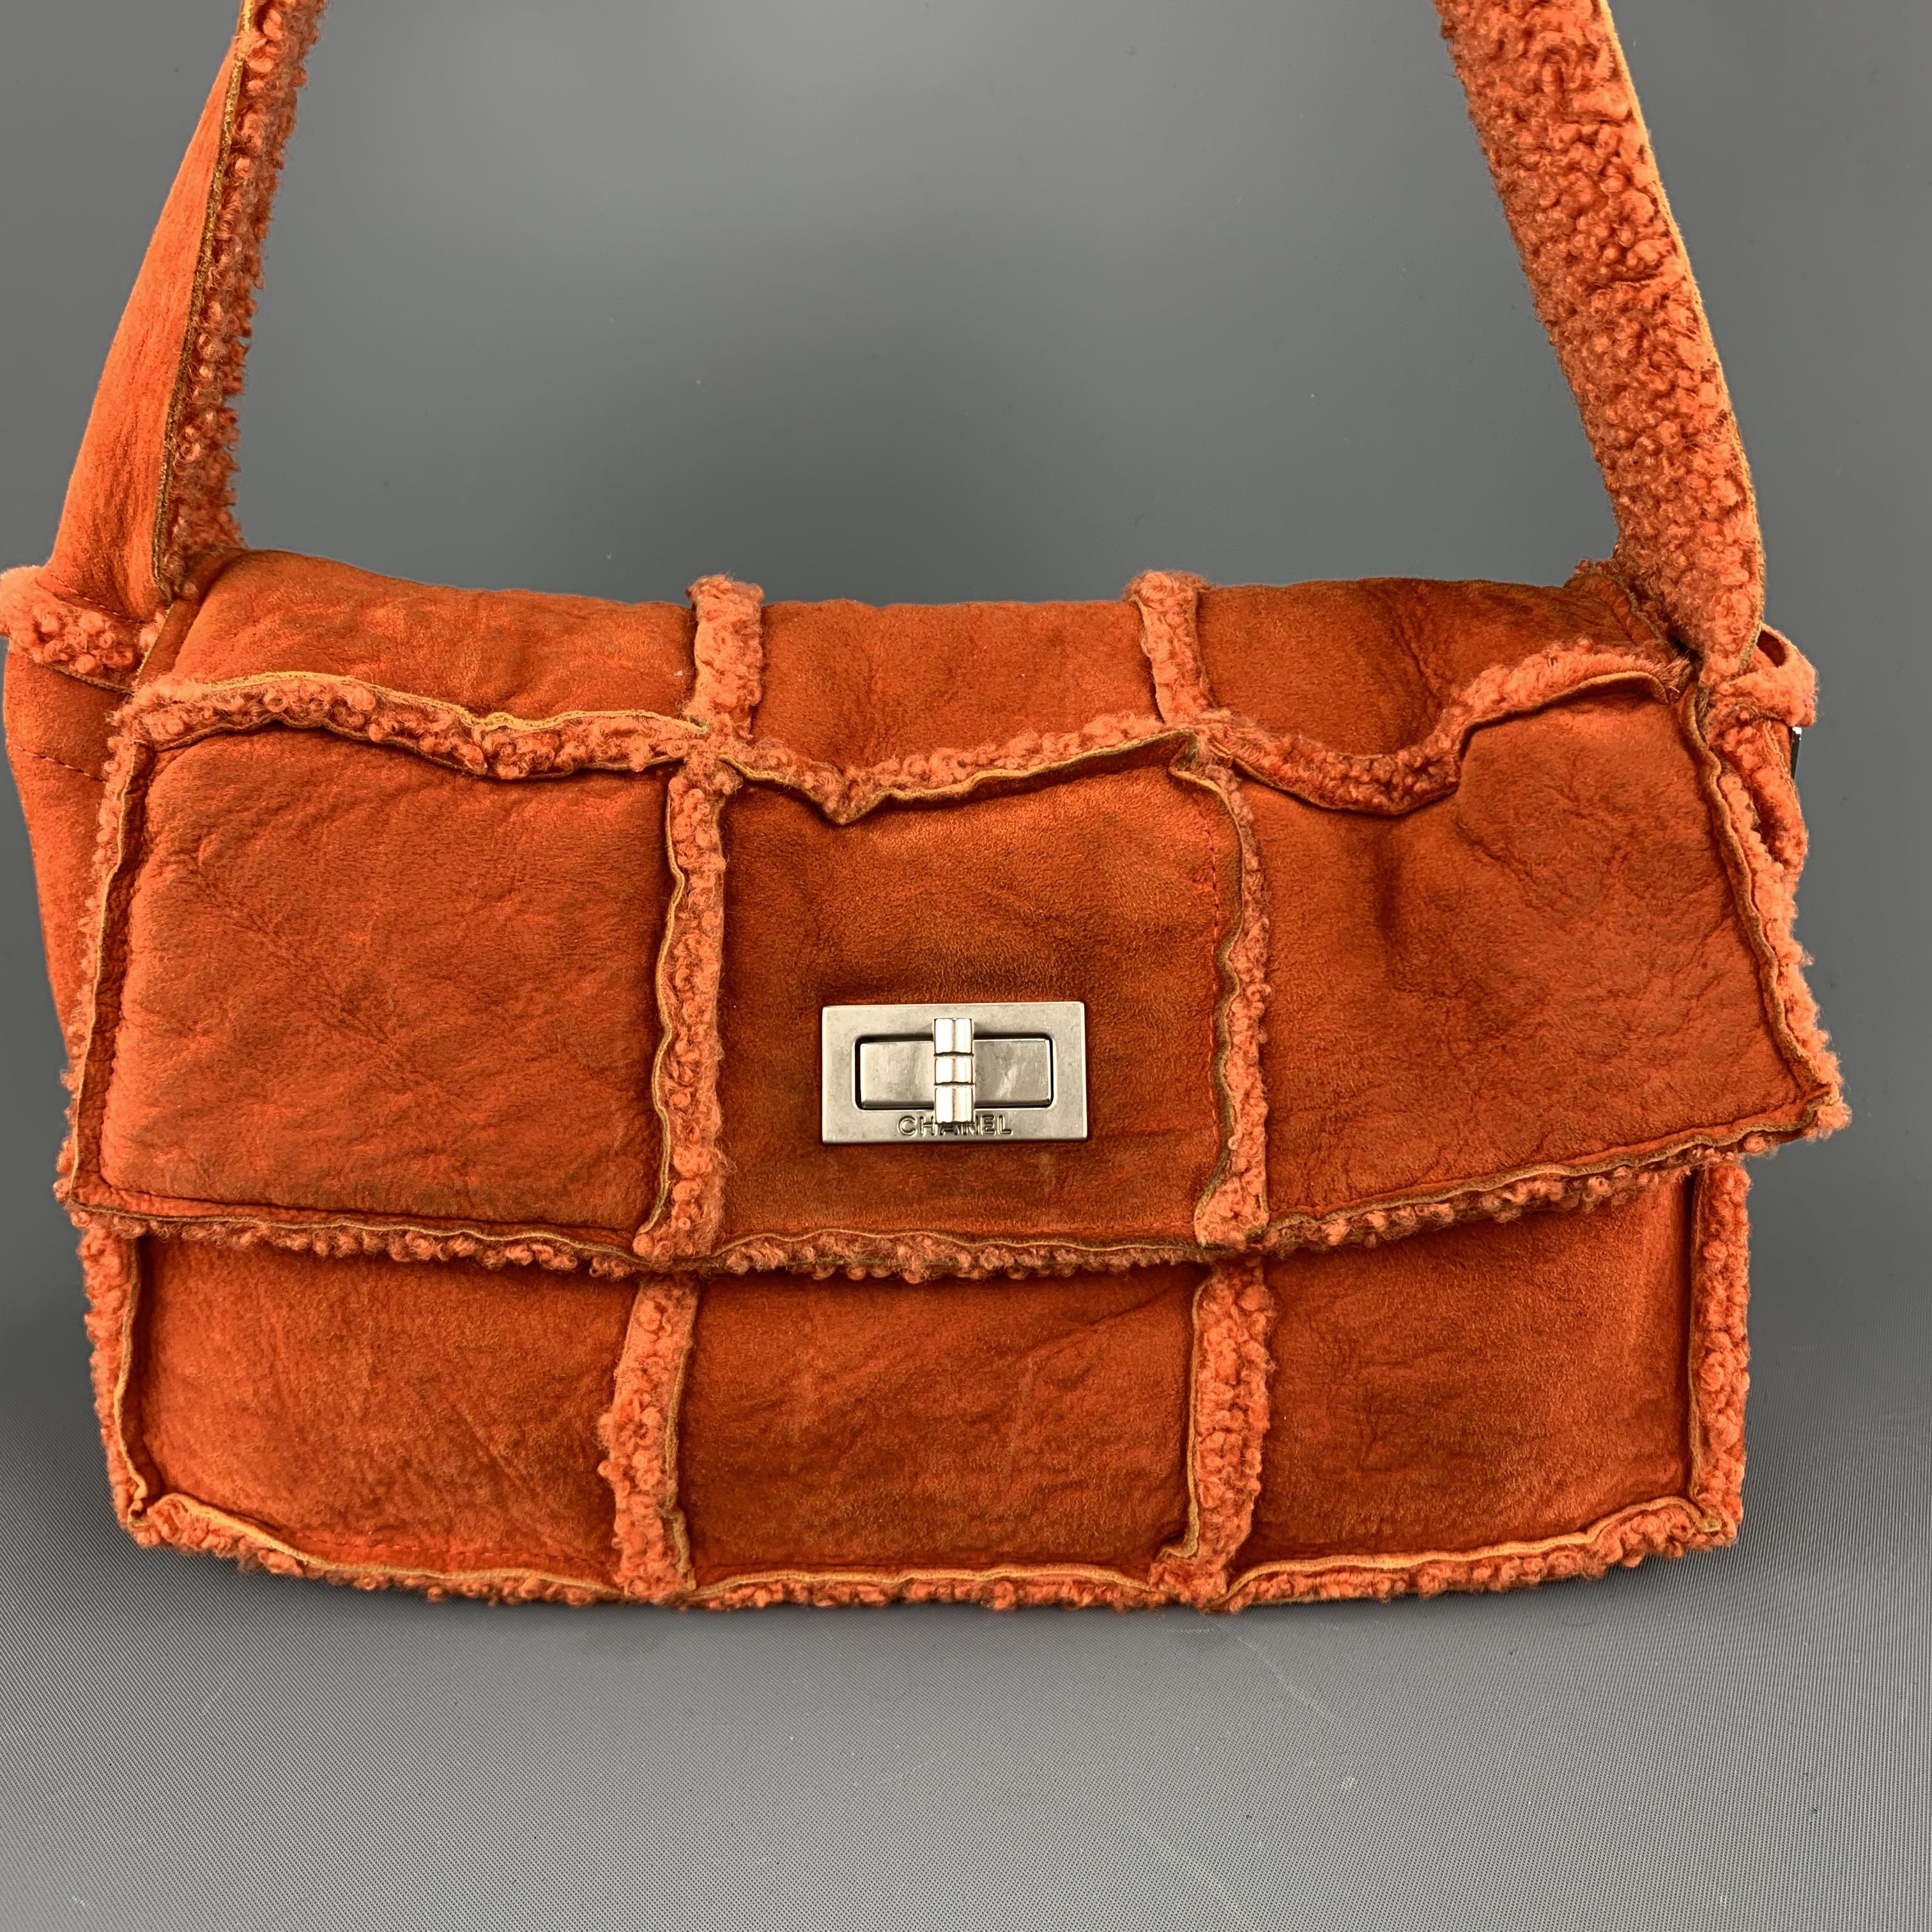 Archive CHANEL shoulder bag comes in orange shearling with fur and features a patchwork quilted structured with flap closure, silver tone turn lock, interior pockets and thick shoulder strap. Wear throughout. As-is. Made in France.
 
Good Pre-Owned